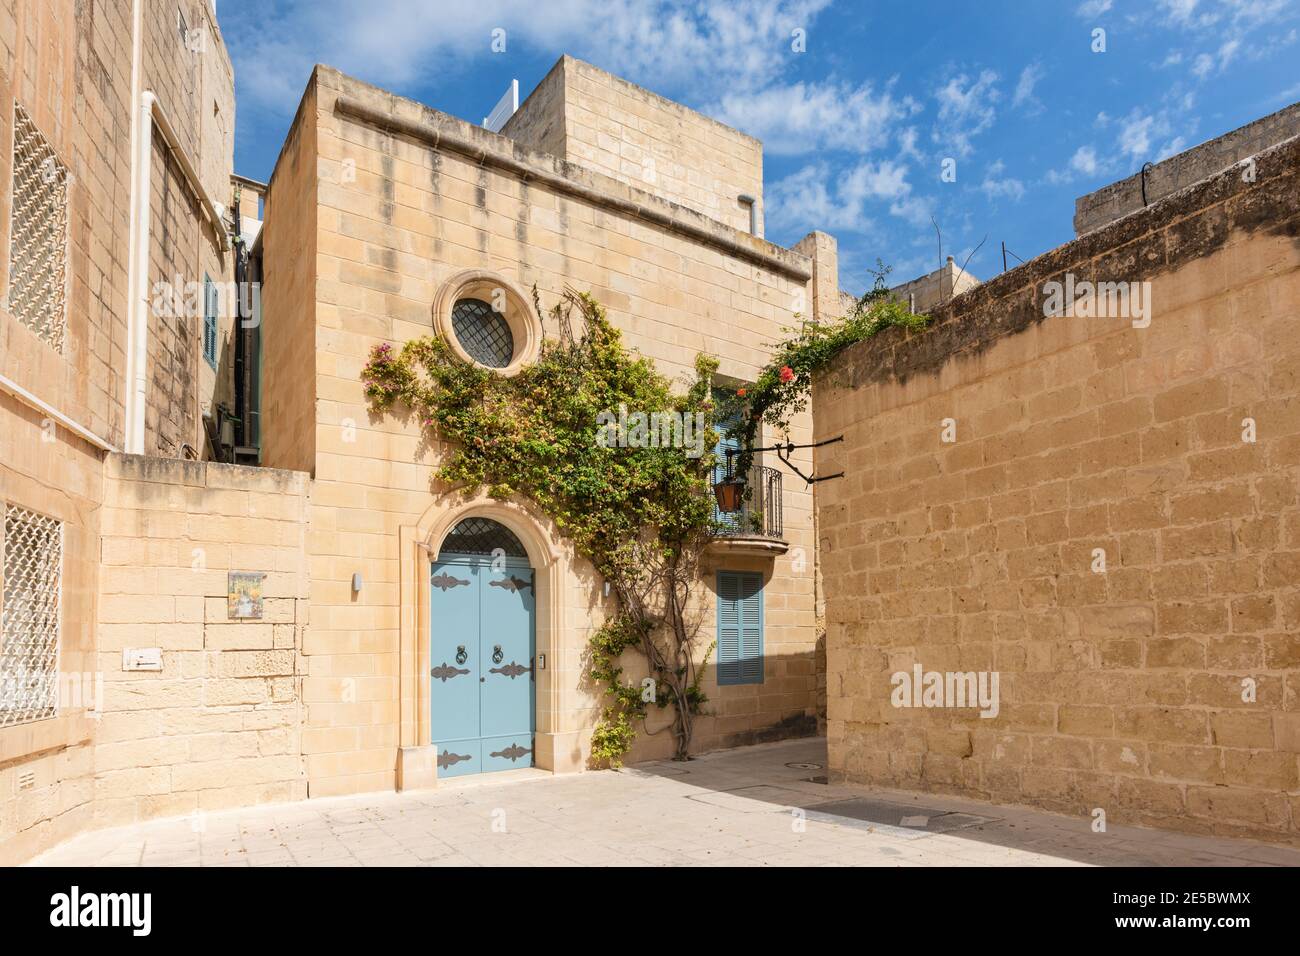 House and entrance doorway in St. Agatha's Bastion Mdina Malta Stock Photo